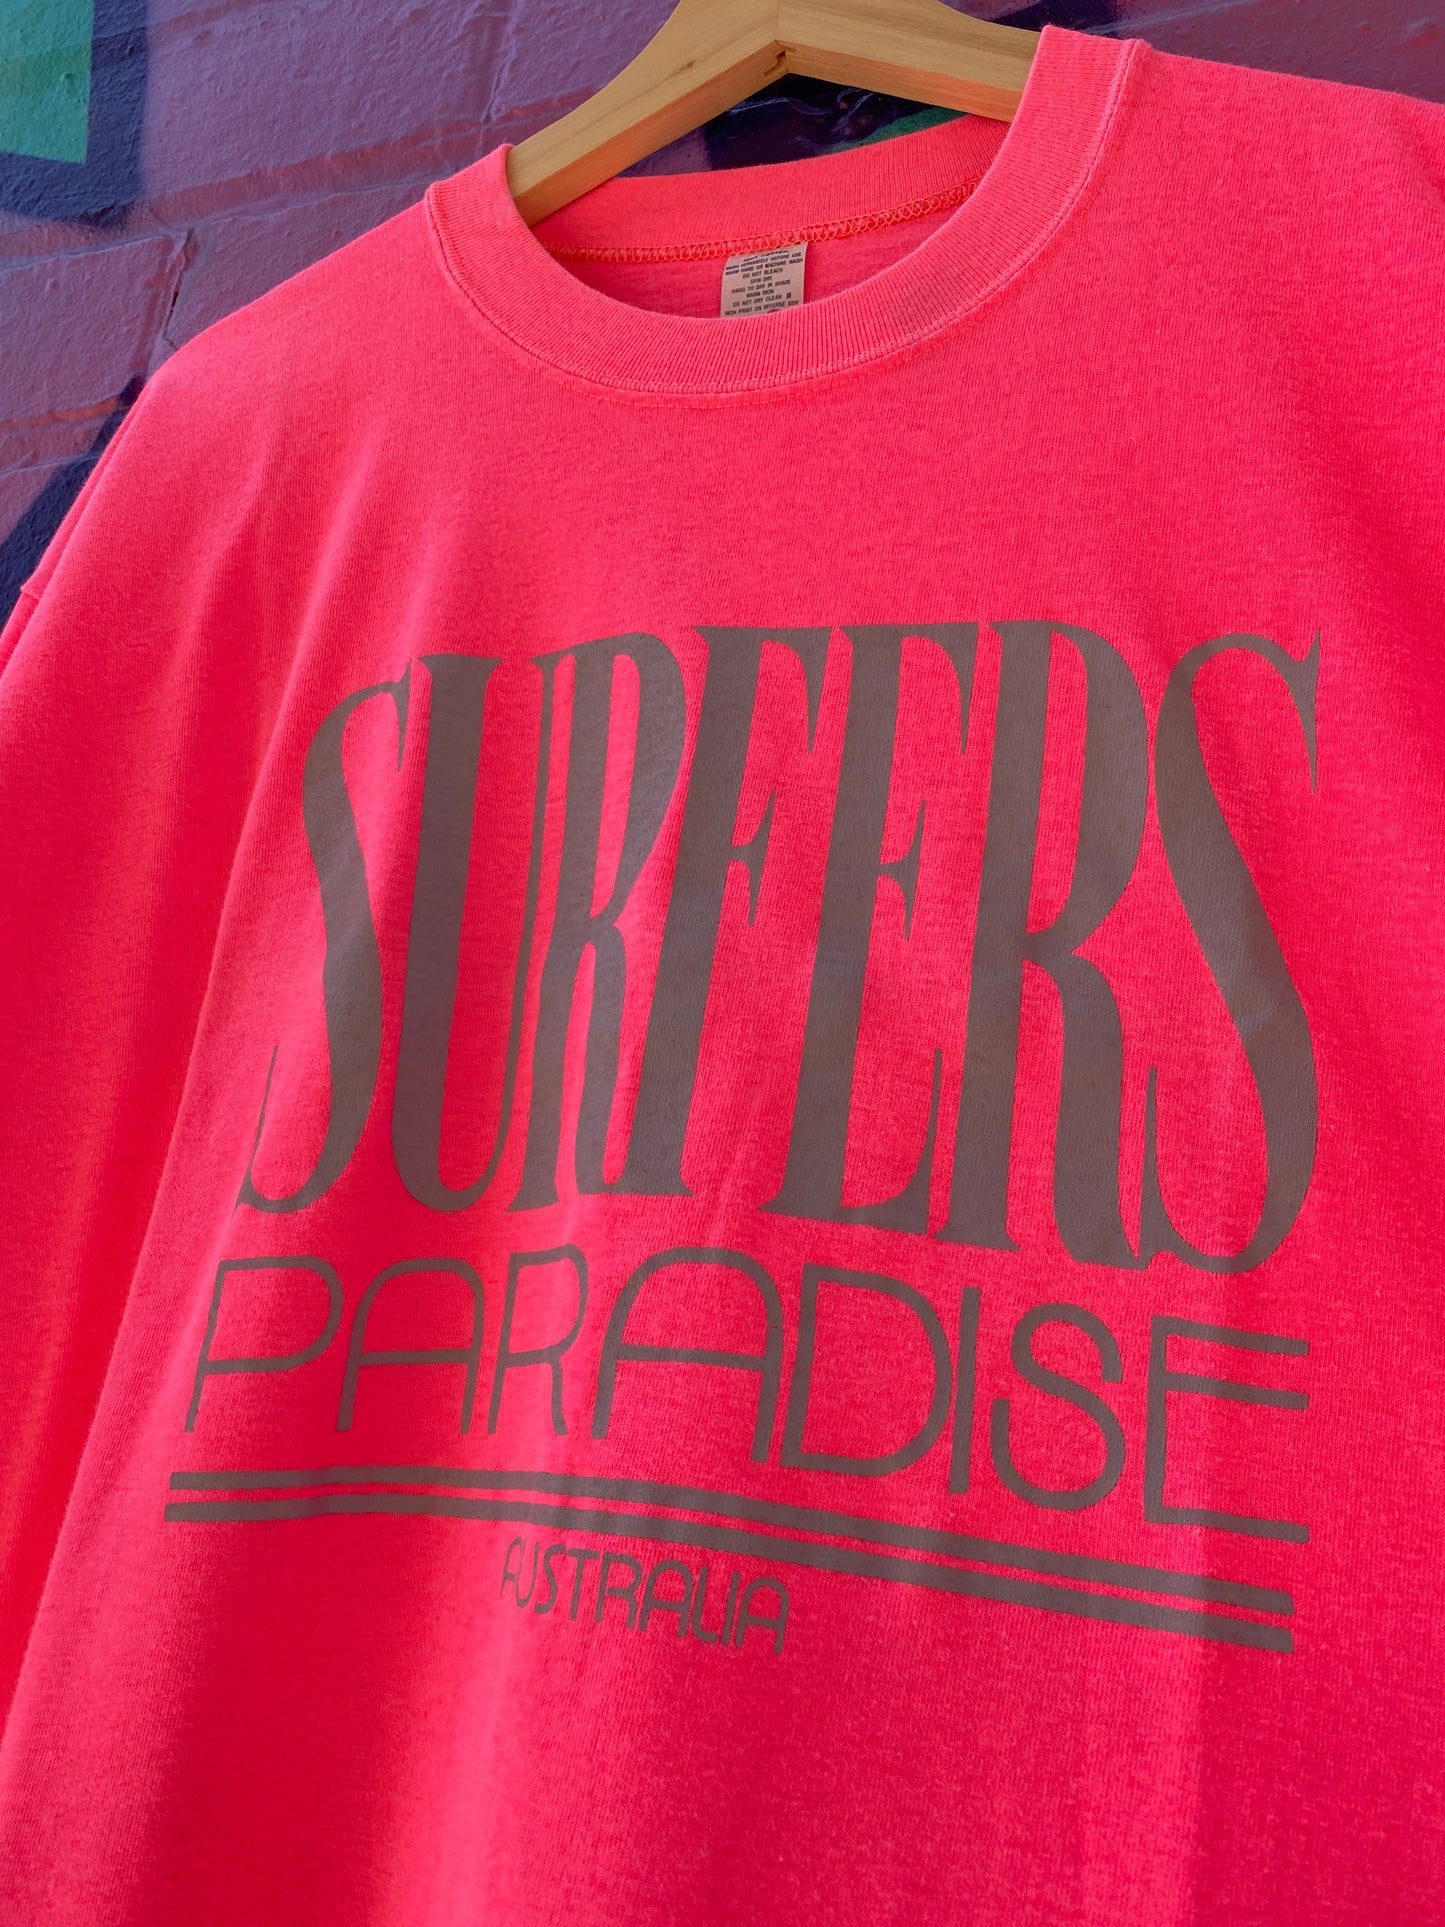 2XL - 90s Fluro Pink Surfers Paradise Aus Made Tee